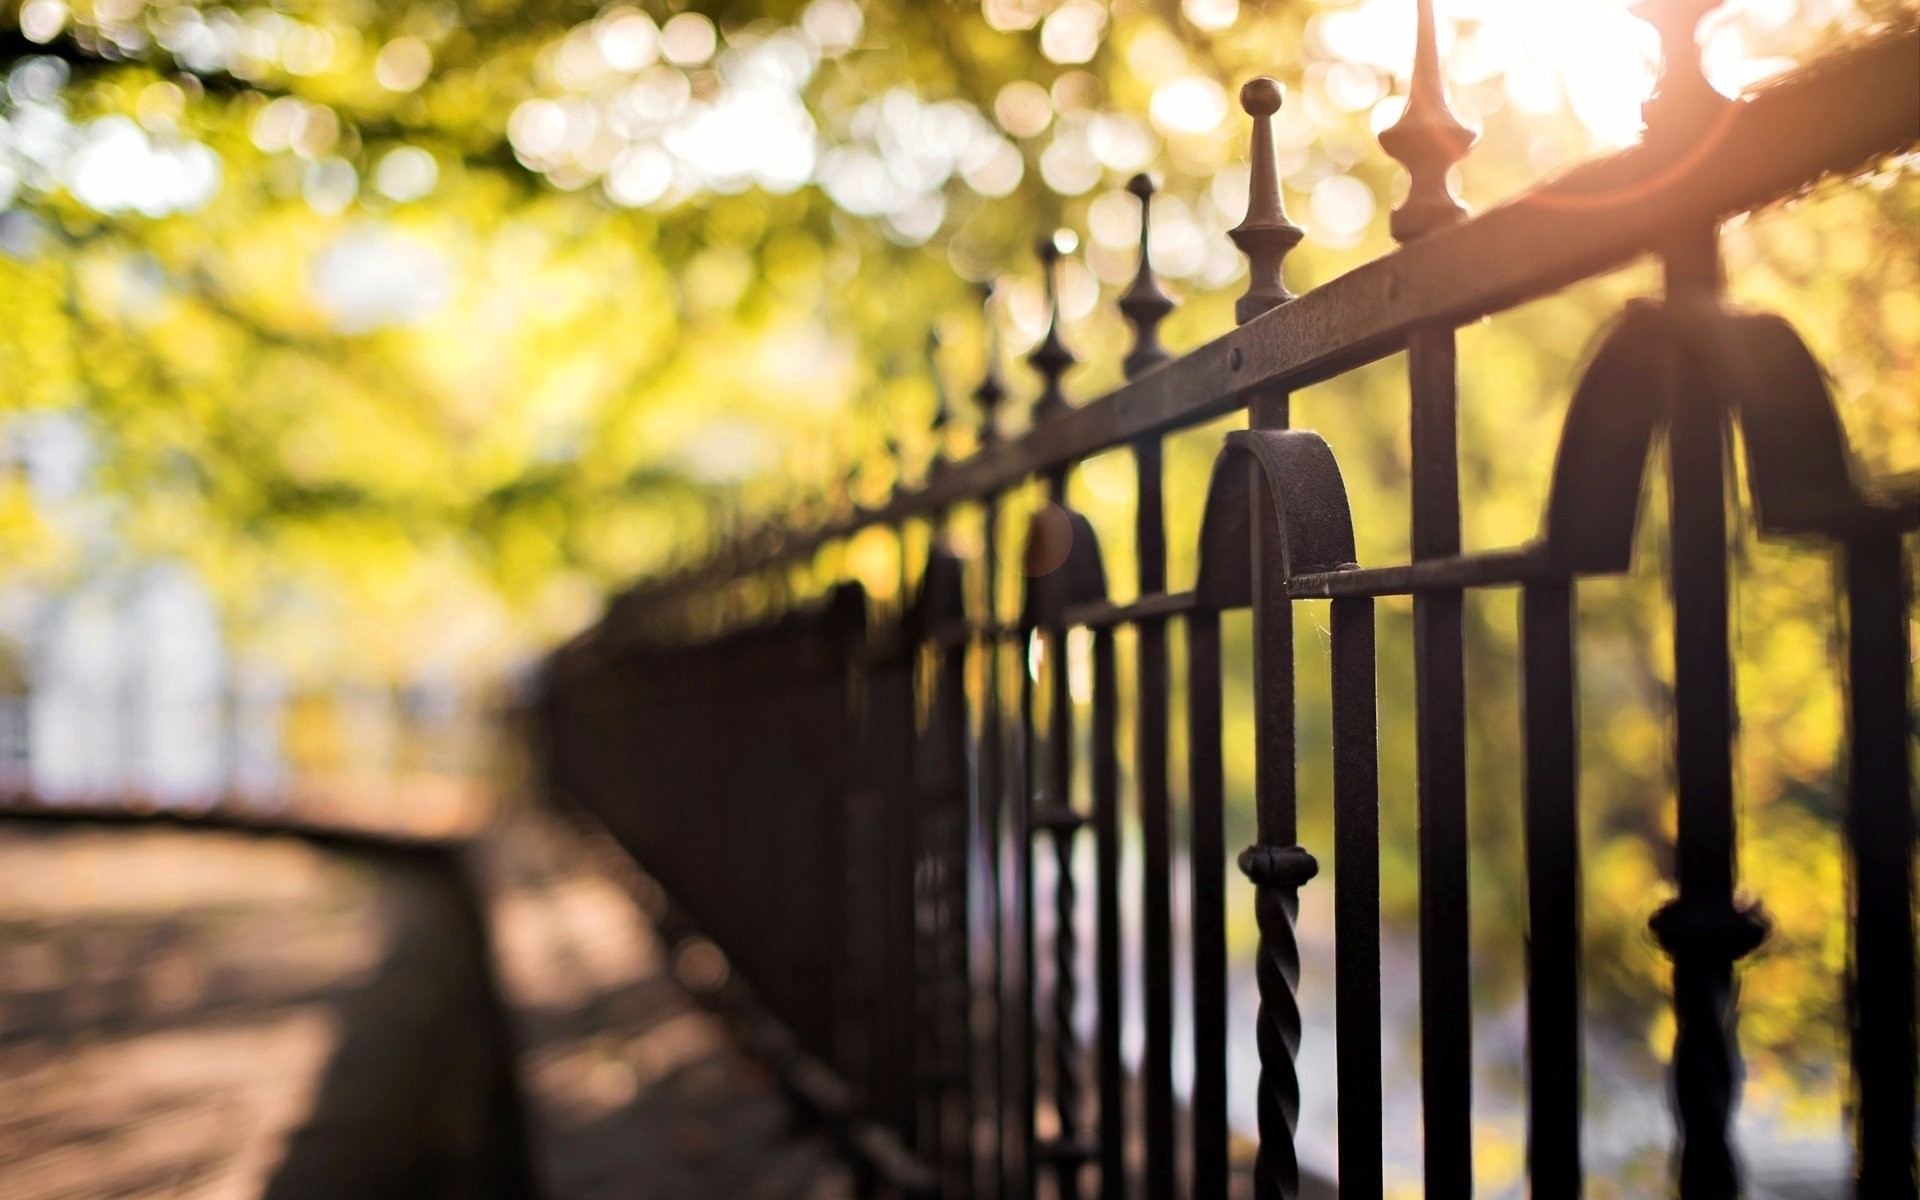 nature, Photography, Macro, Sunlight, Fence, Leaves, Blurred, Road